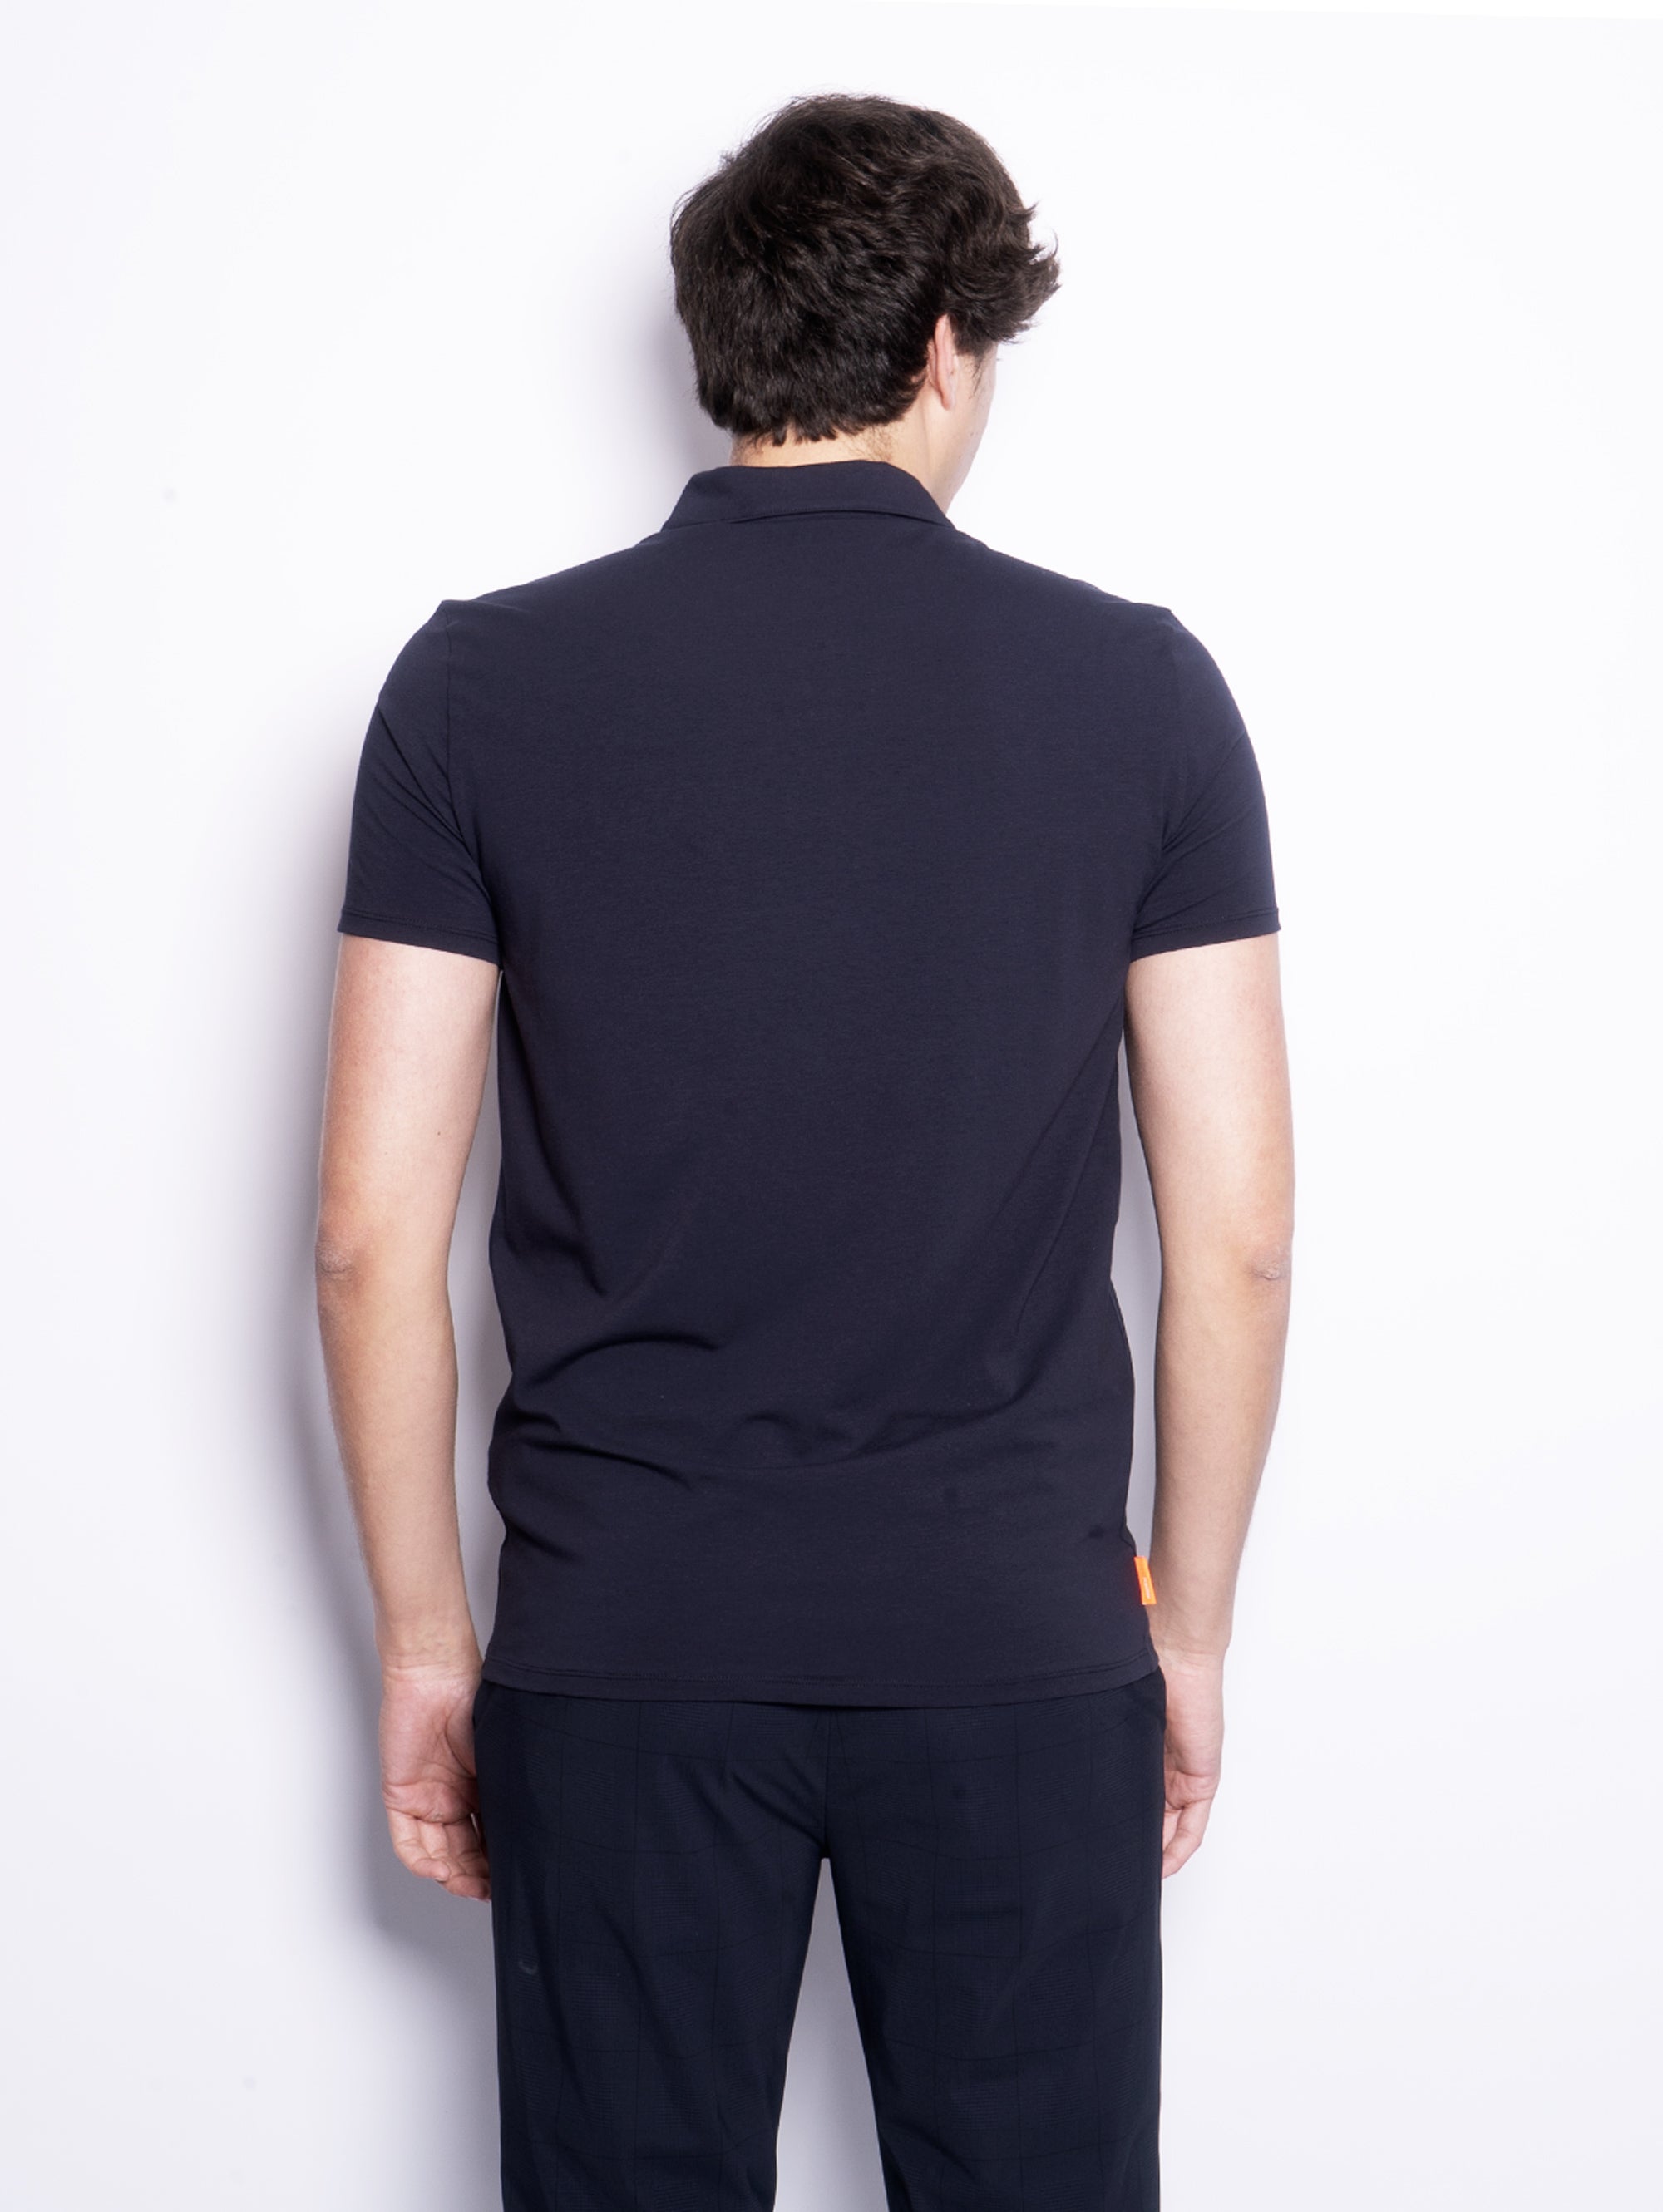 Polo shirt in midnight blue technical fabric